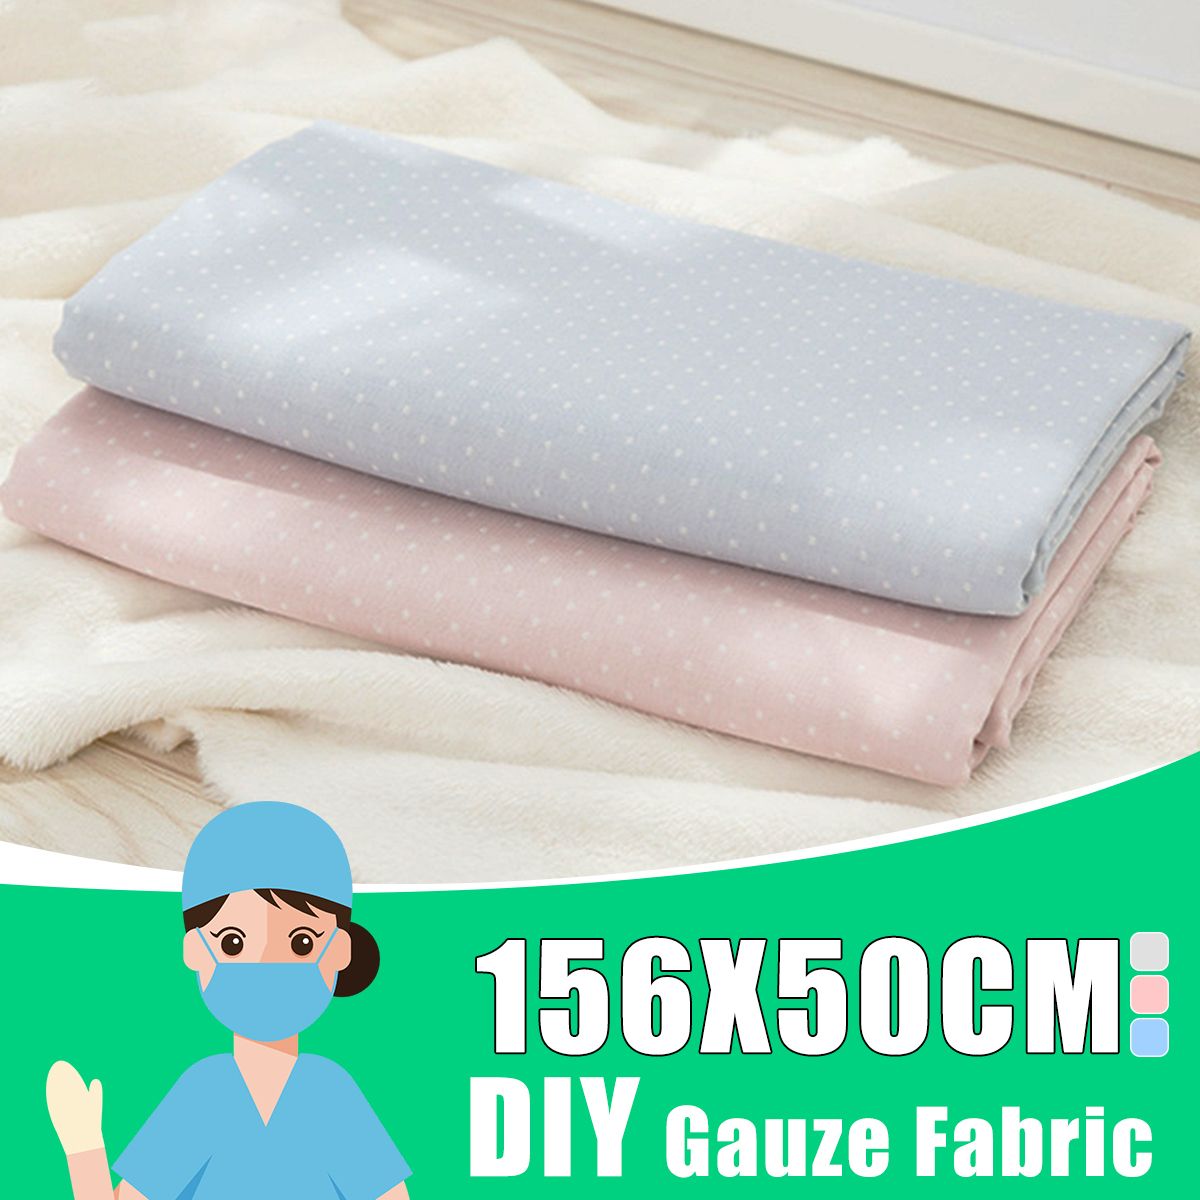 50cmx156cm-Eco-friendly-Cotton-Gauze-Fabric-Double-Layer-Sewing-Material-Fluorescent-free-for-Diy-Ma-1741202